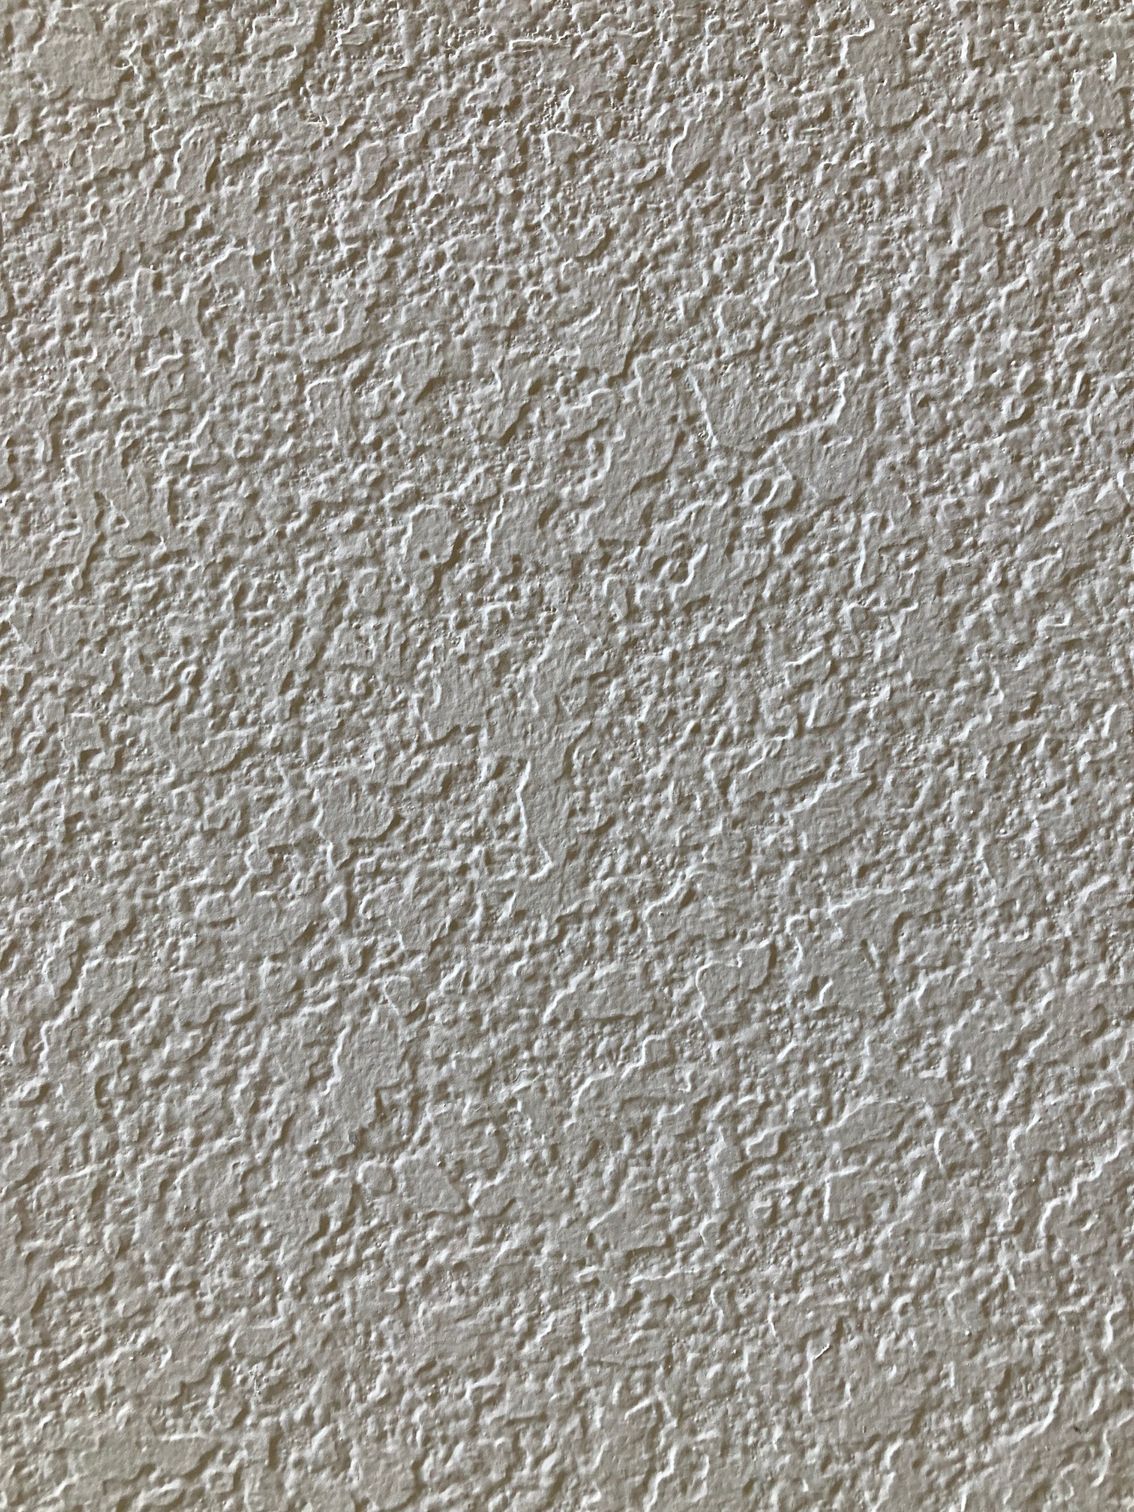 Textured Ceiling